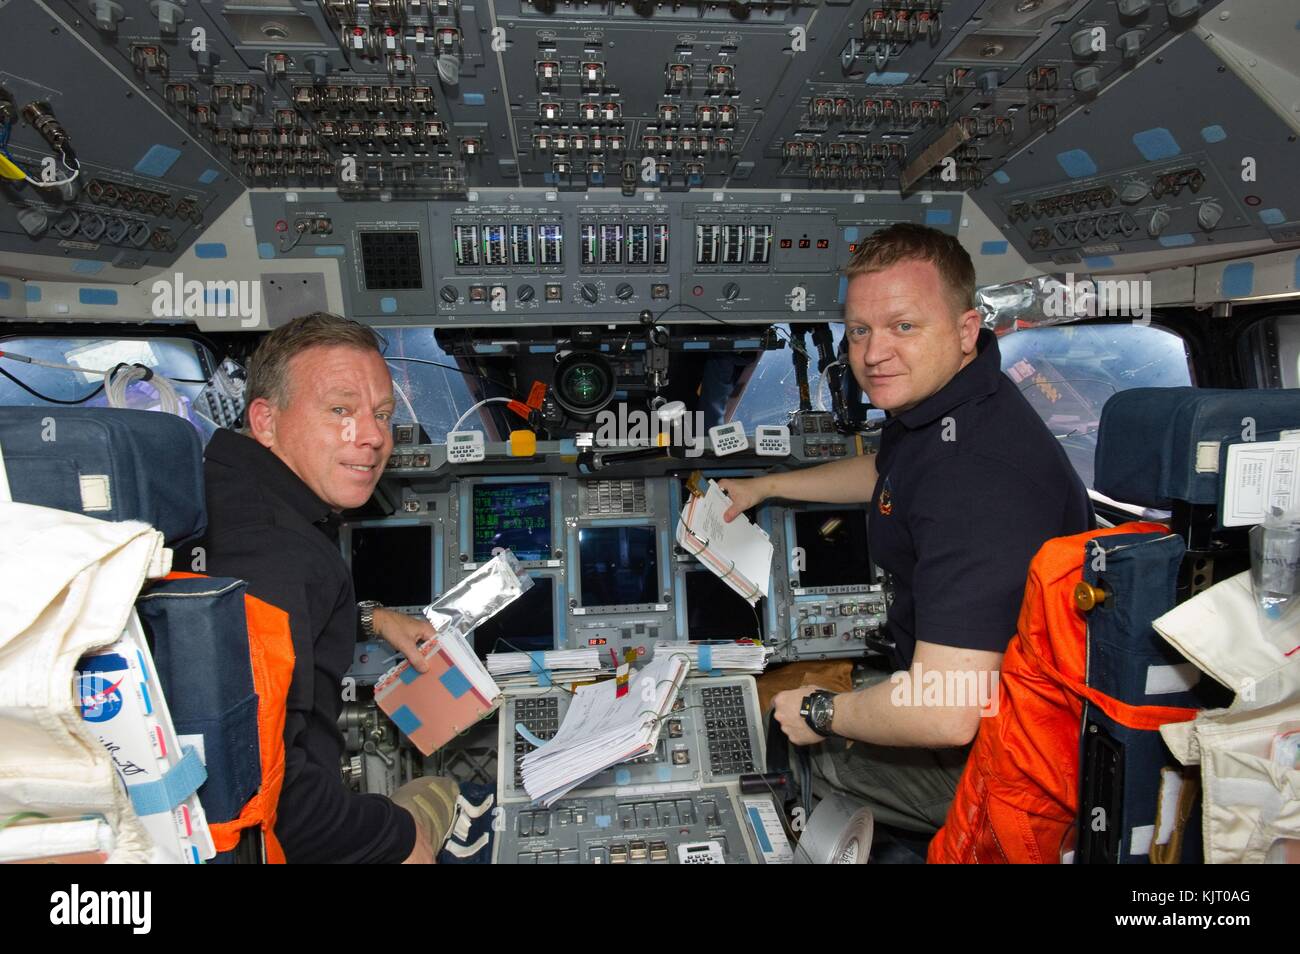 NASA STS-133 mission prime crew astronauts Steve Lindsey (left) and Eric Boe work in the flight deck of the Space Shuttle Discovery March 7, 2011 in Earth orbit.  (photo by NASA Photo via Planetpix) Stock Photo